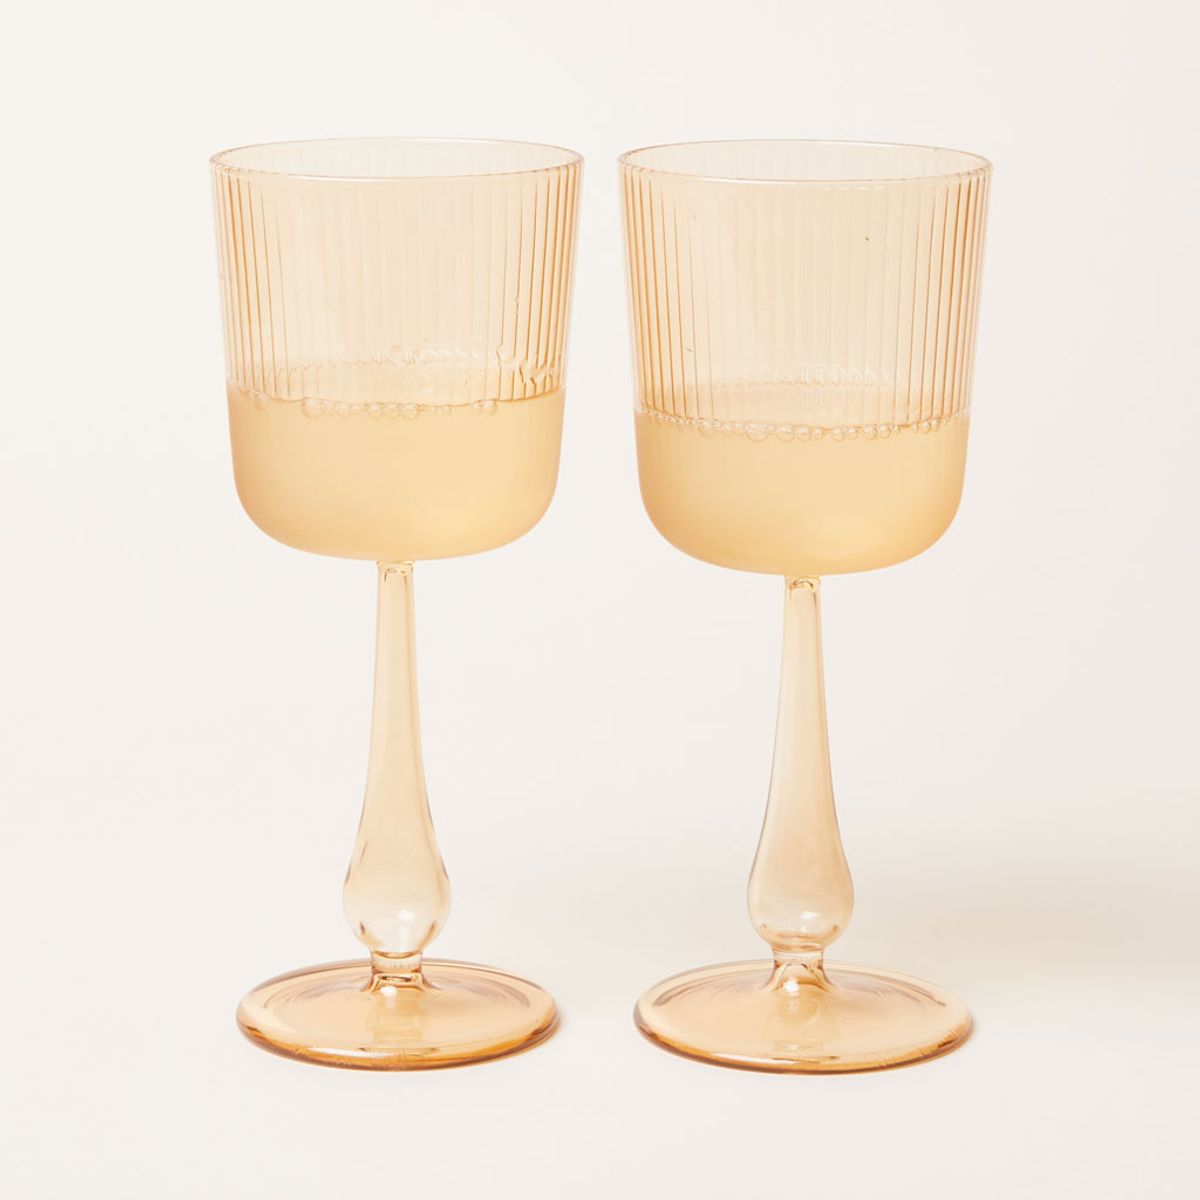 Tuccio Calice Set by R + D Lab - East Fork Glassware